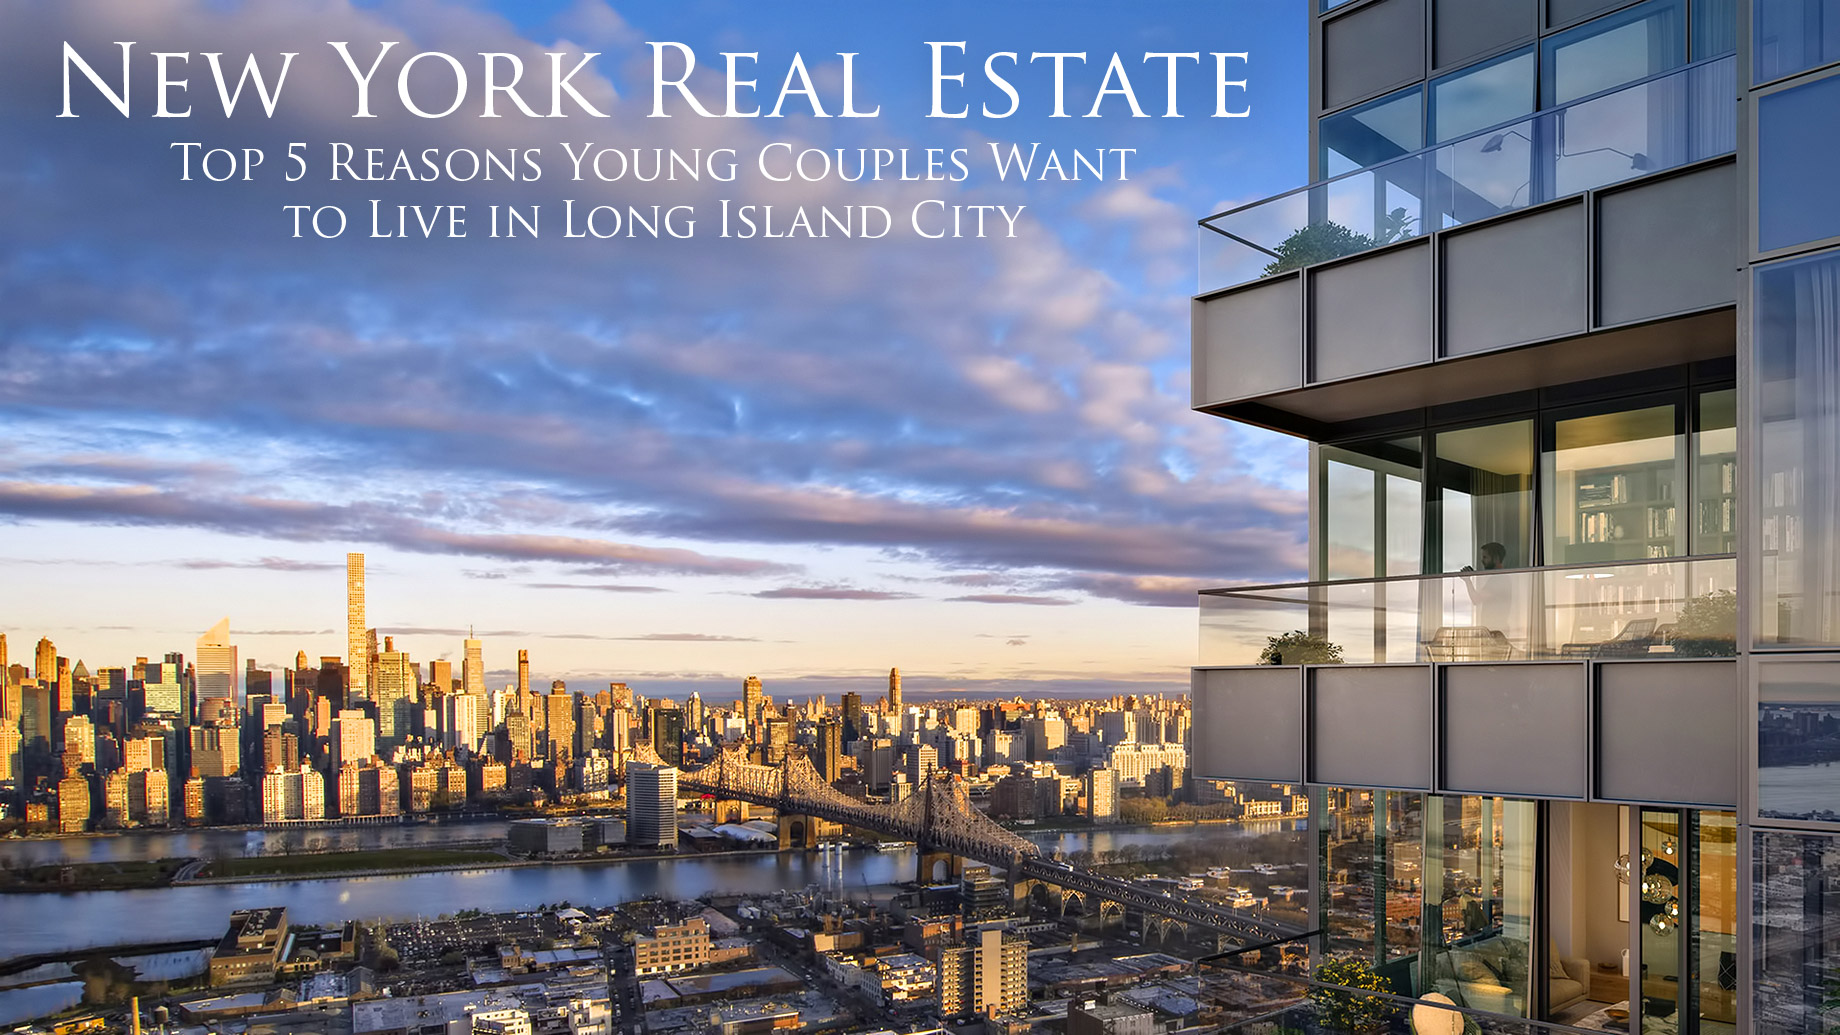 New York Real Estate - Top 5 Reasons Young Couples Want to Live in Long Island City